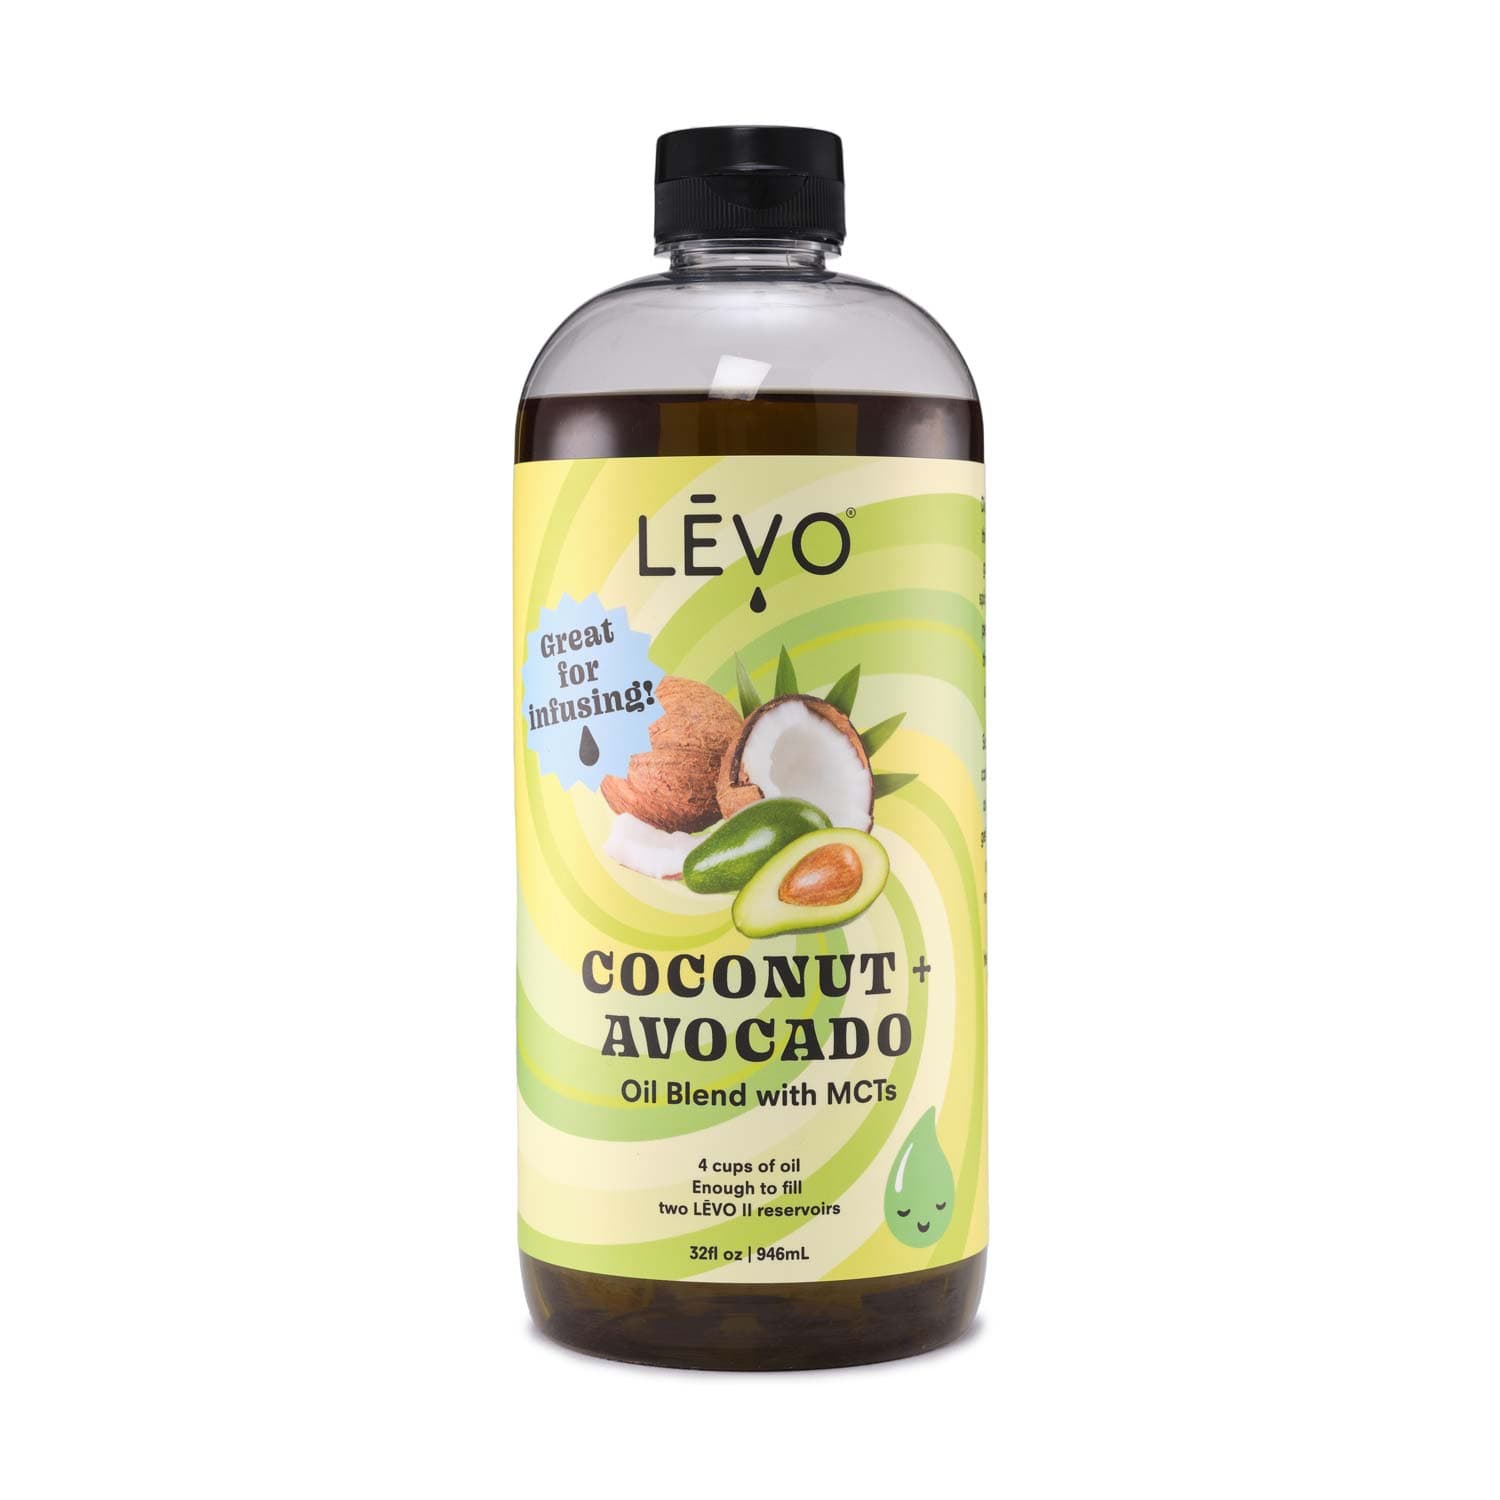 Coconut Avocado Oil Blend from LEVO is great for infusing because of the high smoke point. Elevate your culinary adventures with LĒVO Coconut MCT + Avocado Blend Infusion Oil.